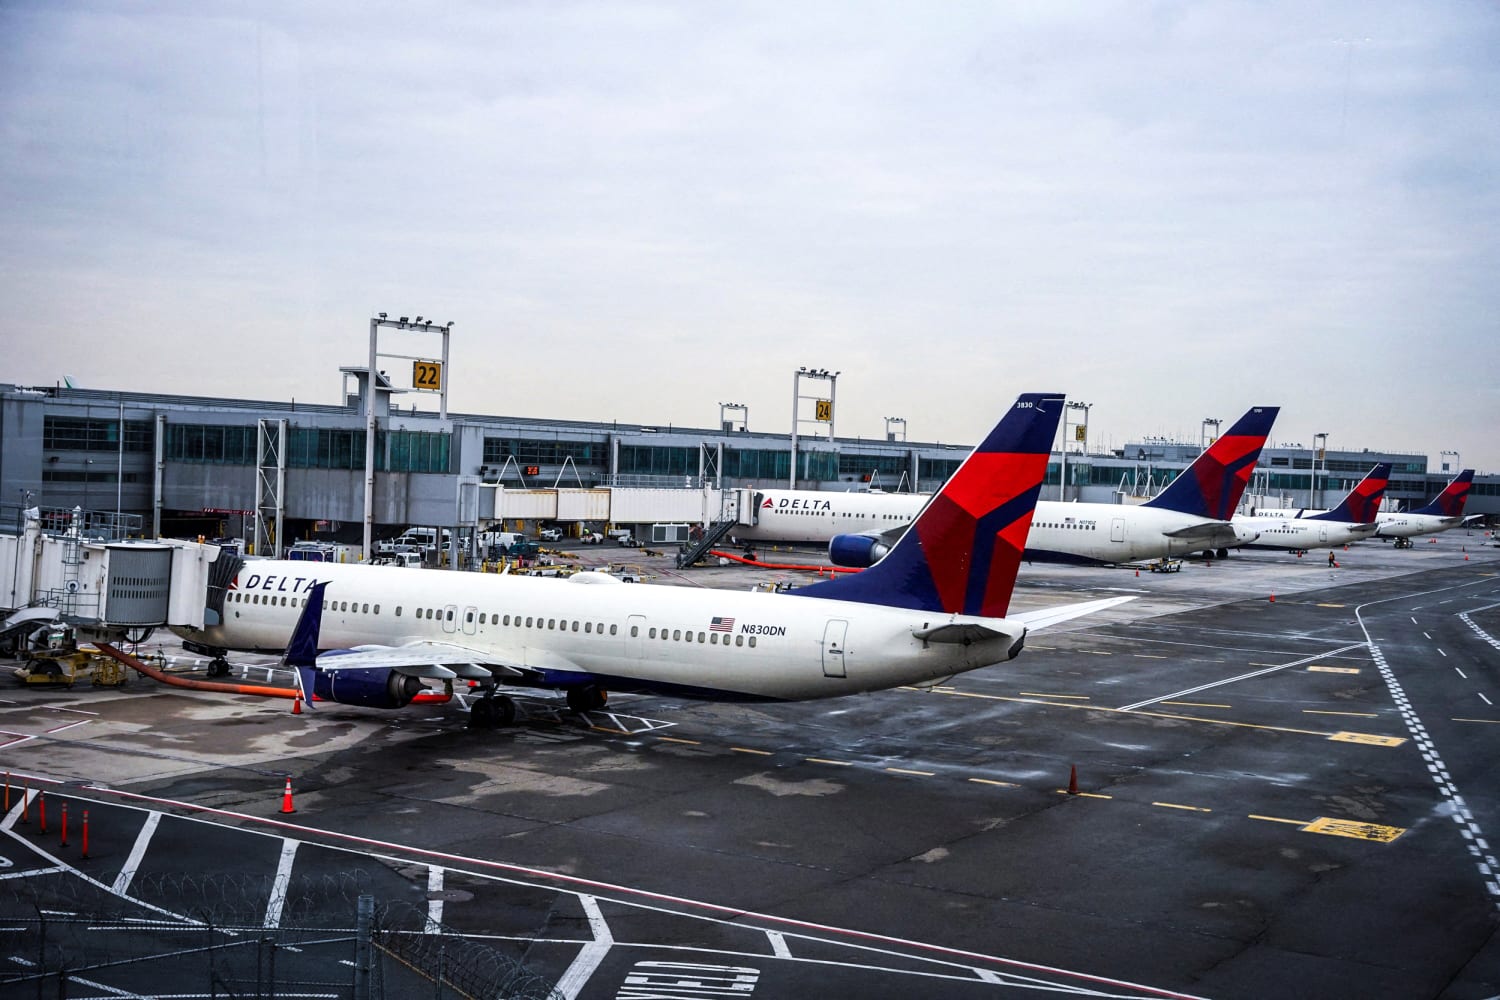 Video shows mask fight between passengers on Delta flight; woman detained at Atlanta airport